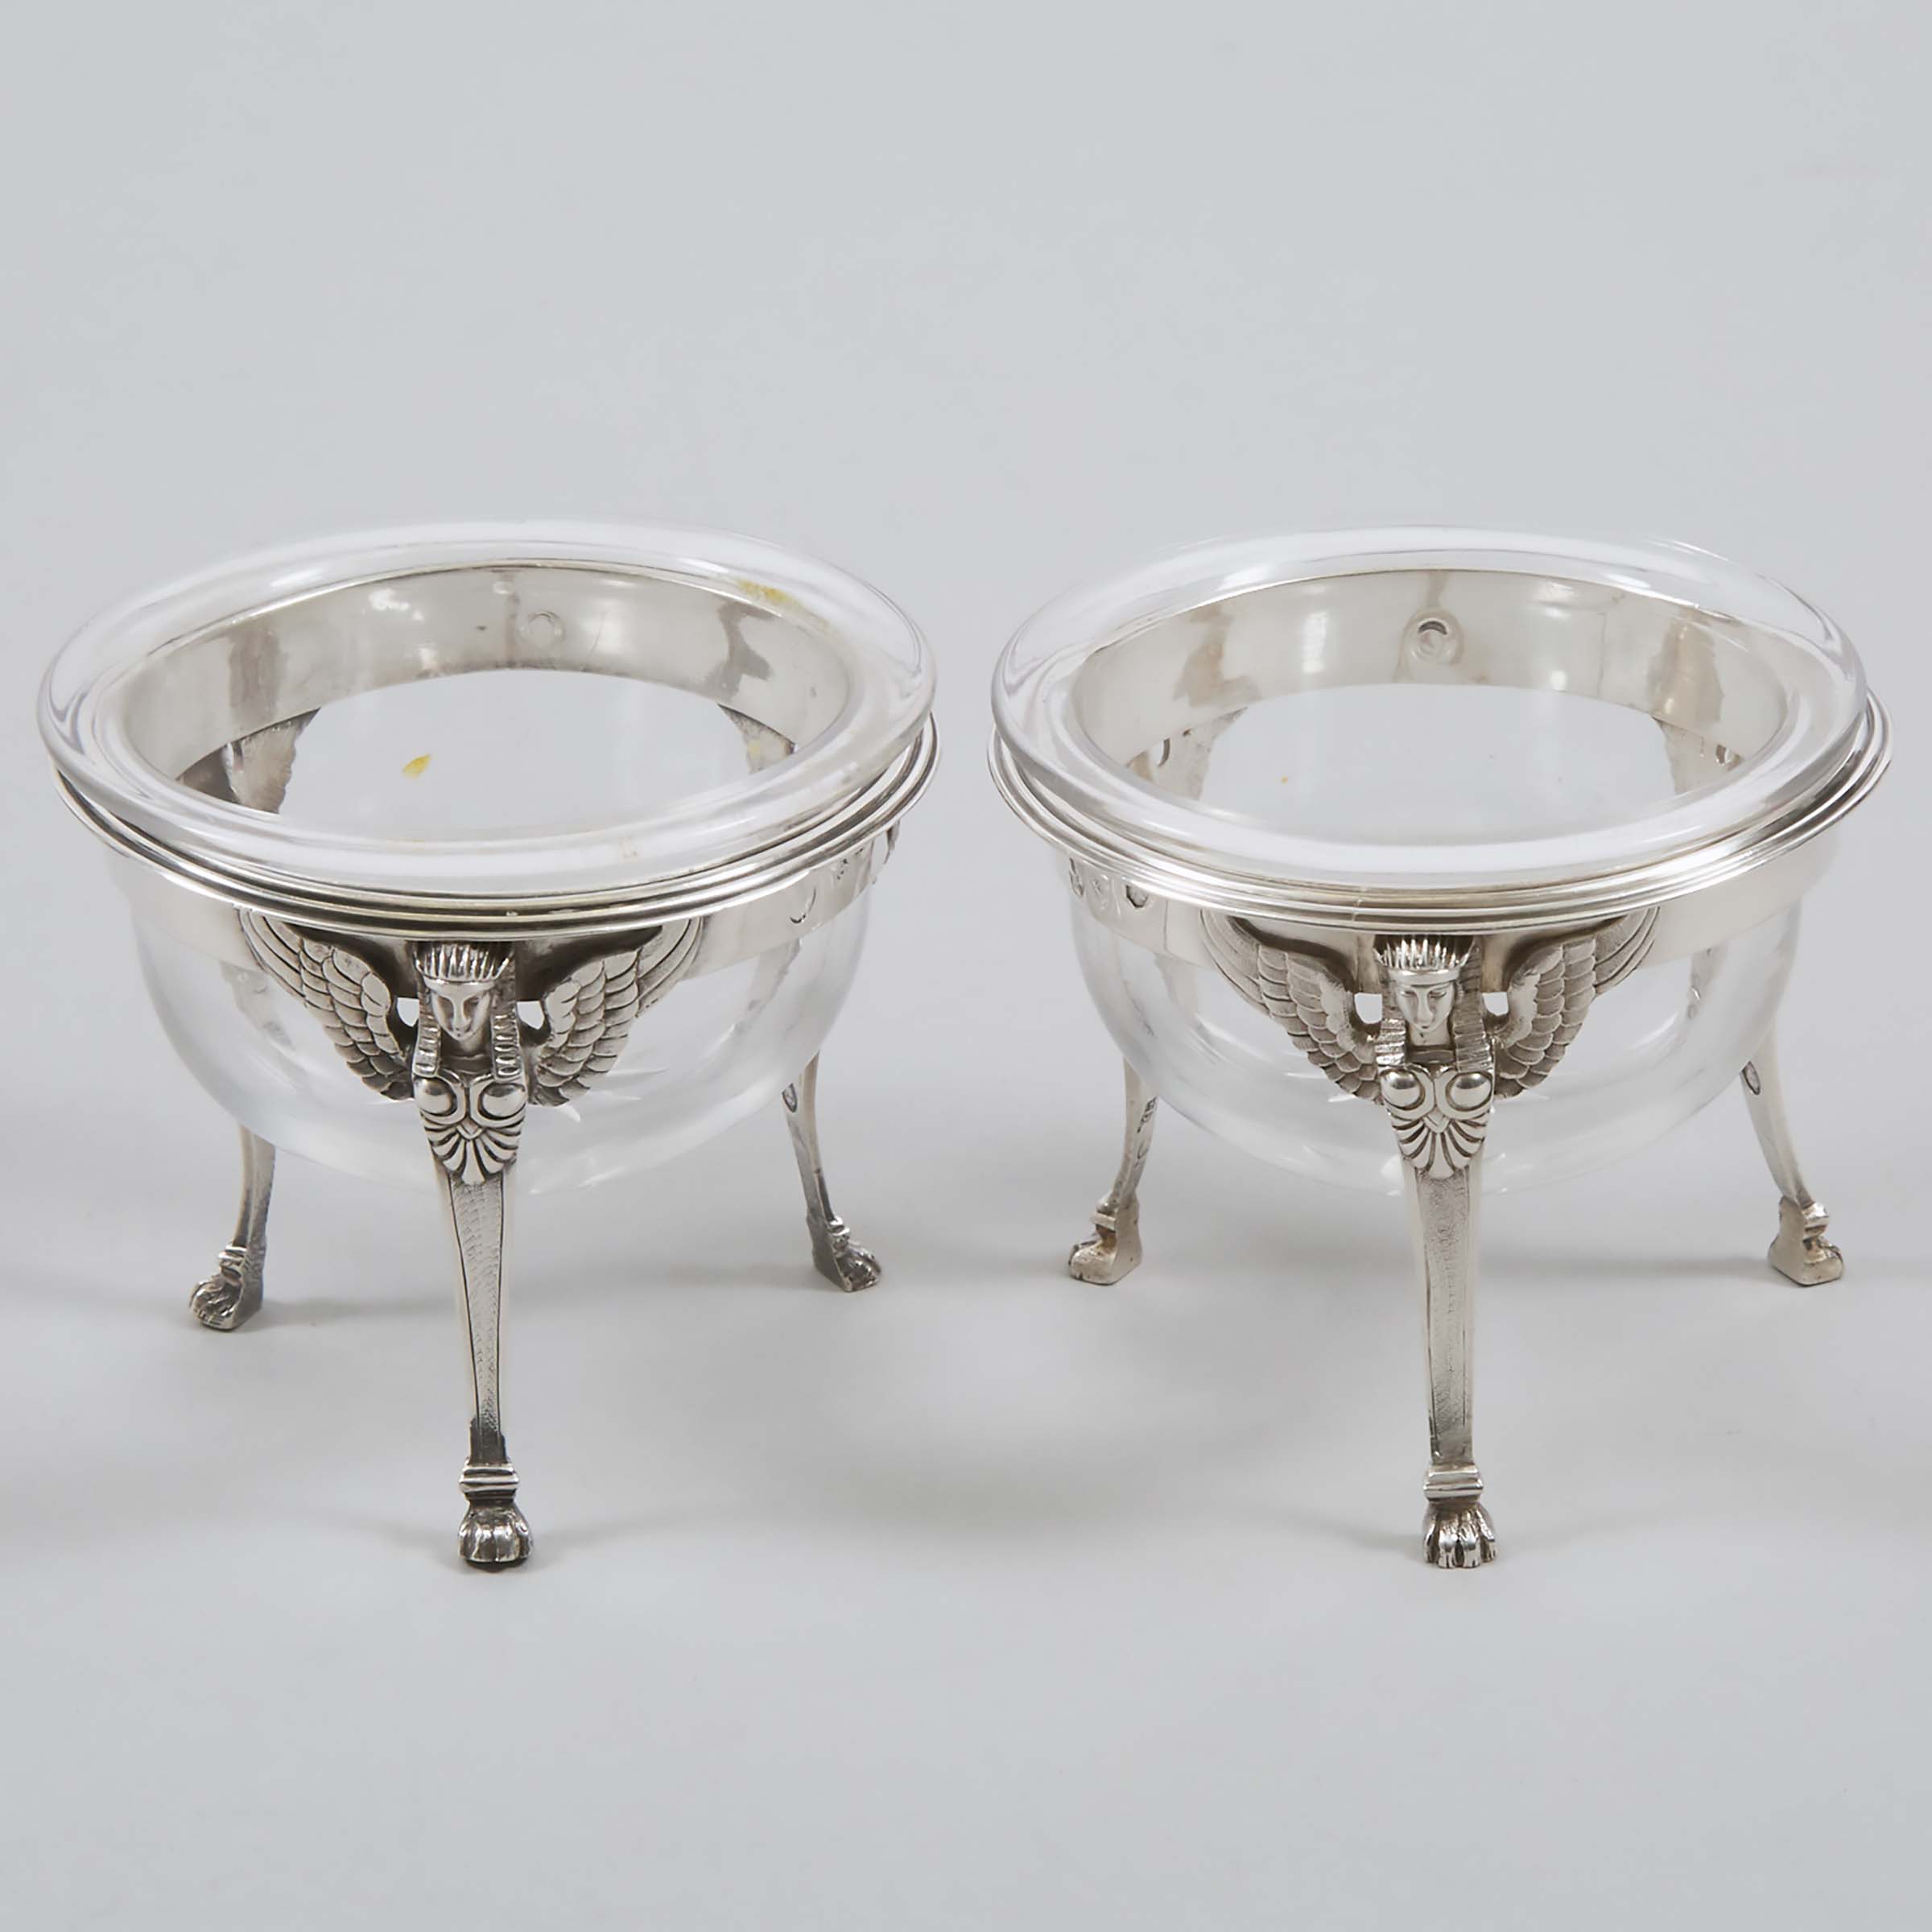 Pair of French Silver Open Salt 3ac39f